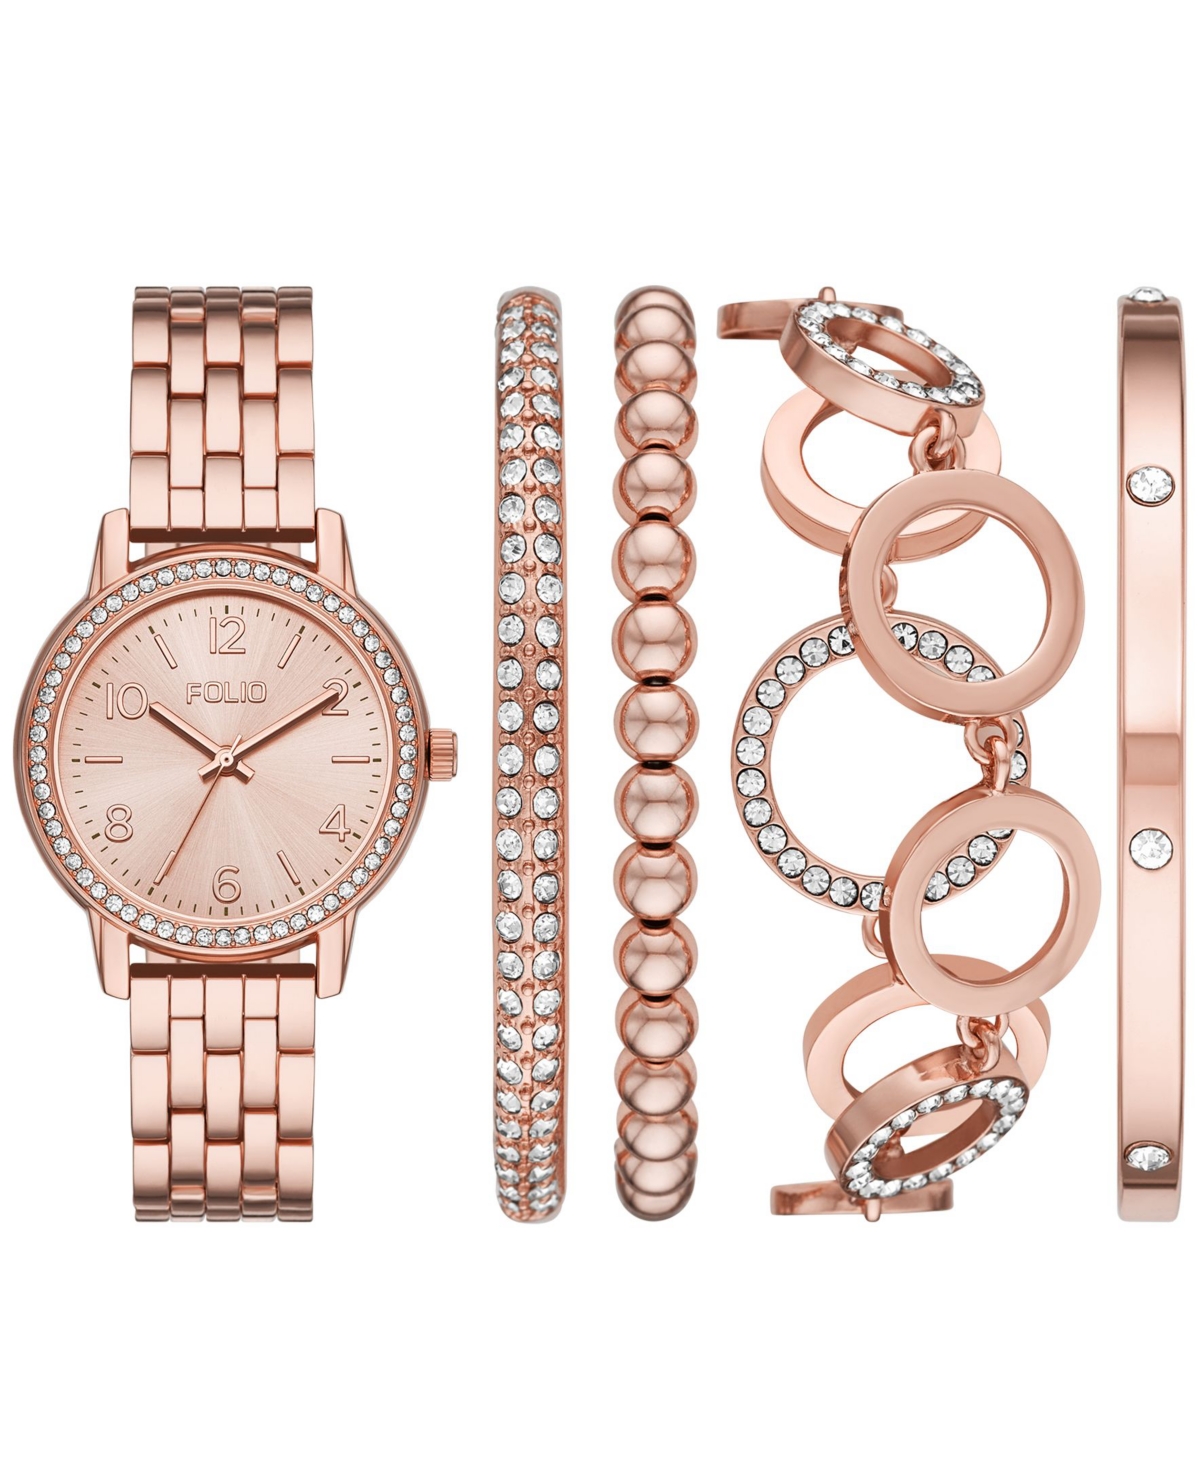 Women's Three Hand Rose Gold-Tone Alloy Watch 35mm Gift Set - Rose Gold-Tone